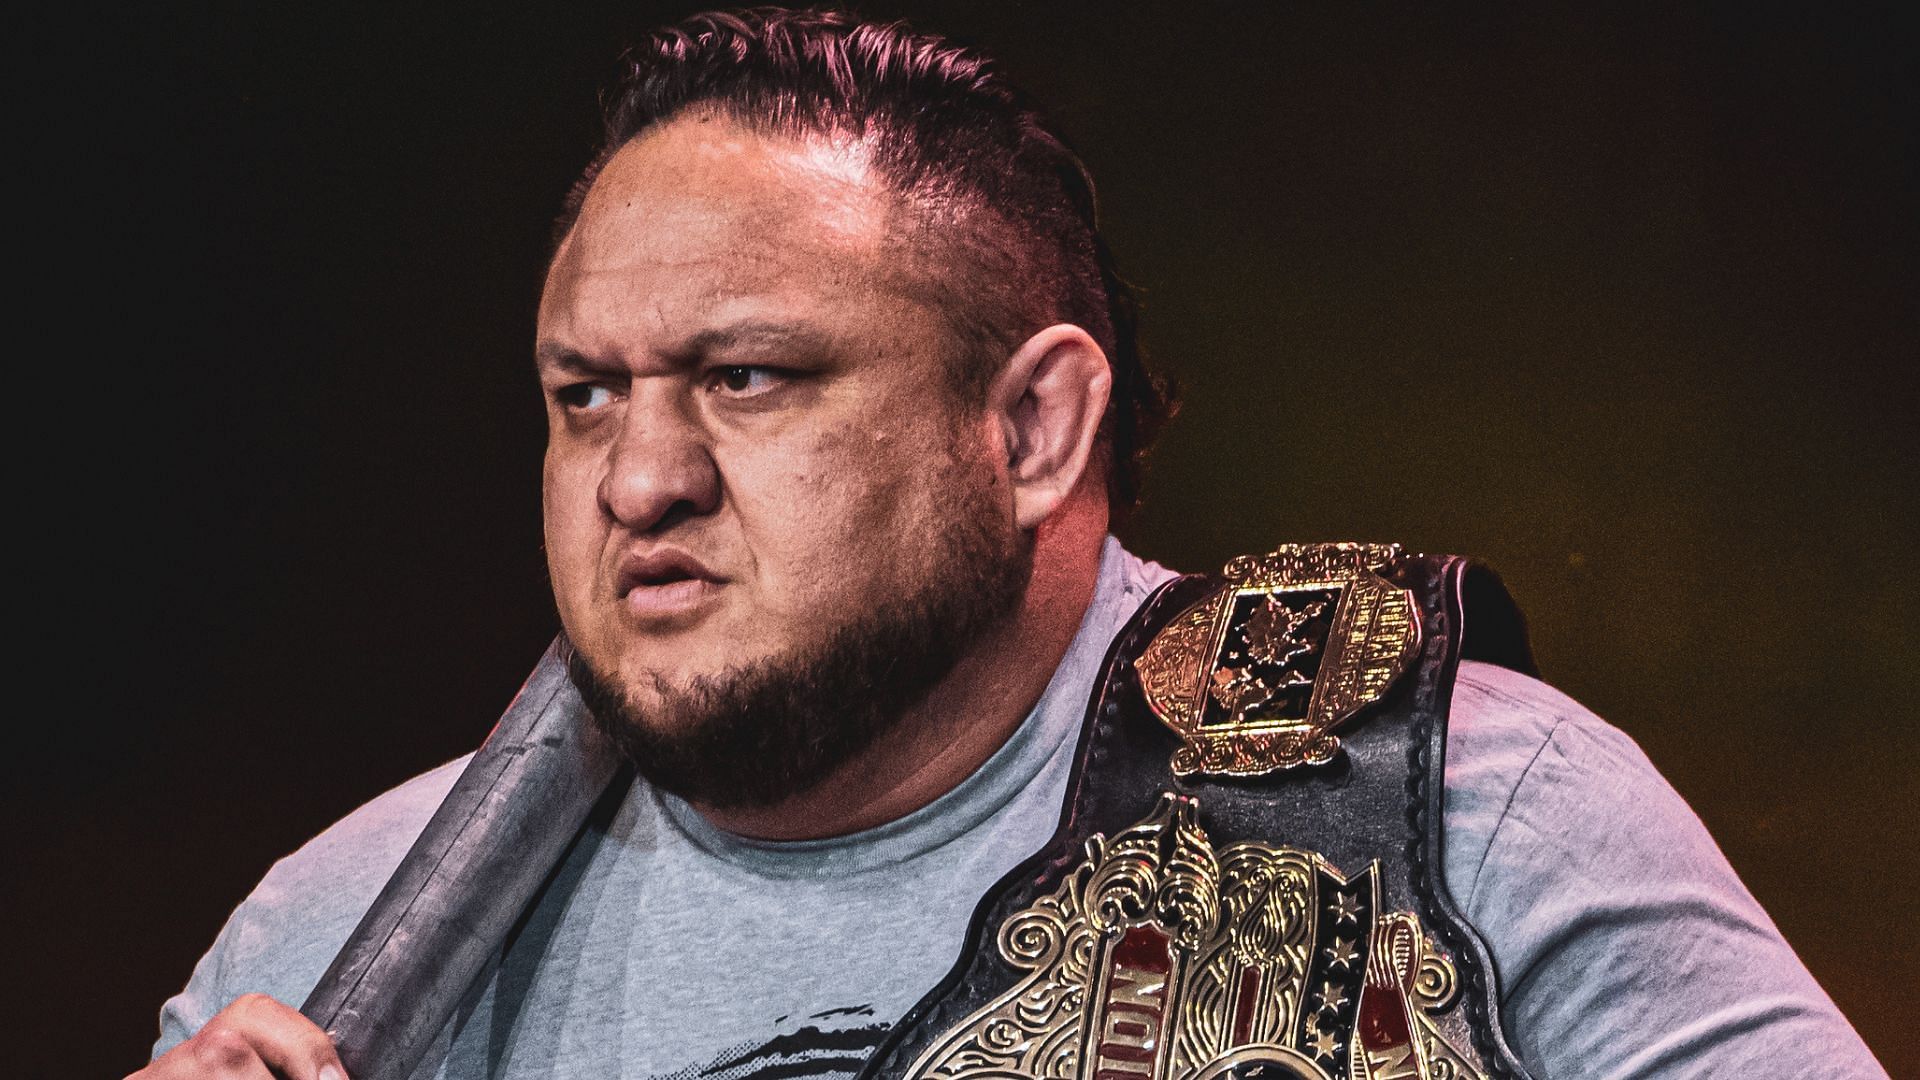 Samoa Joe has some strong words for a former world champion